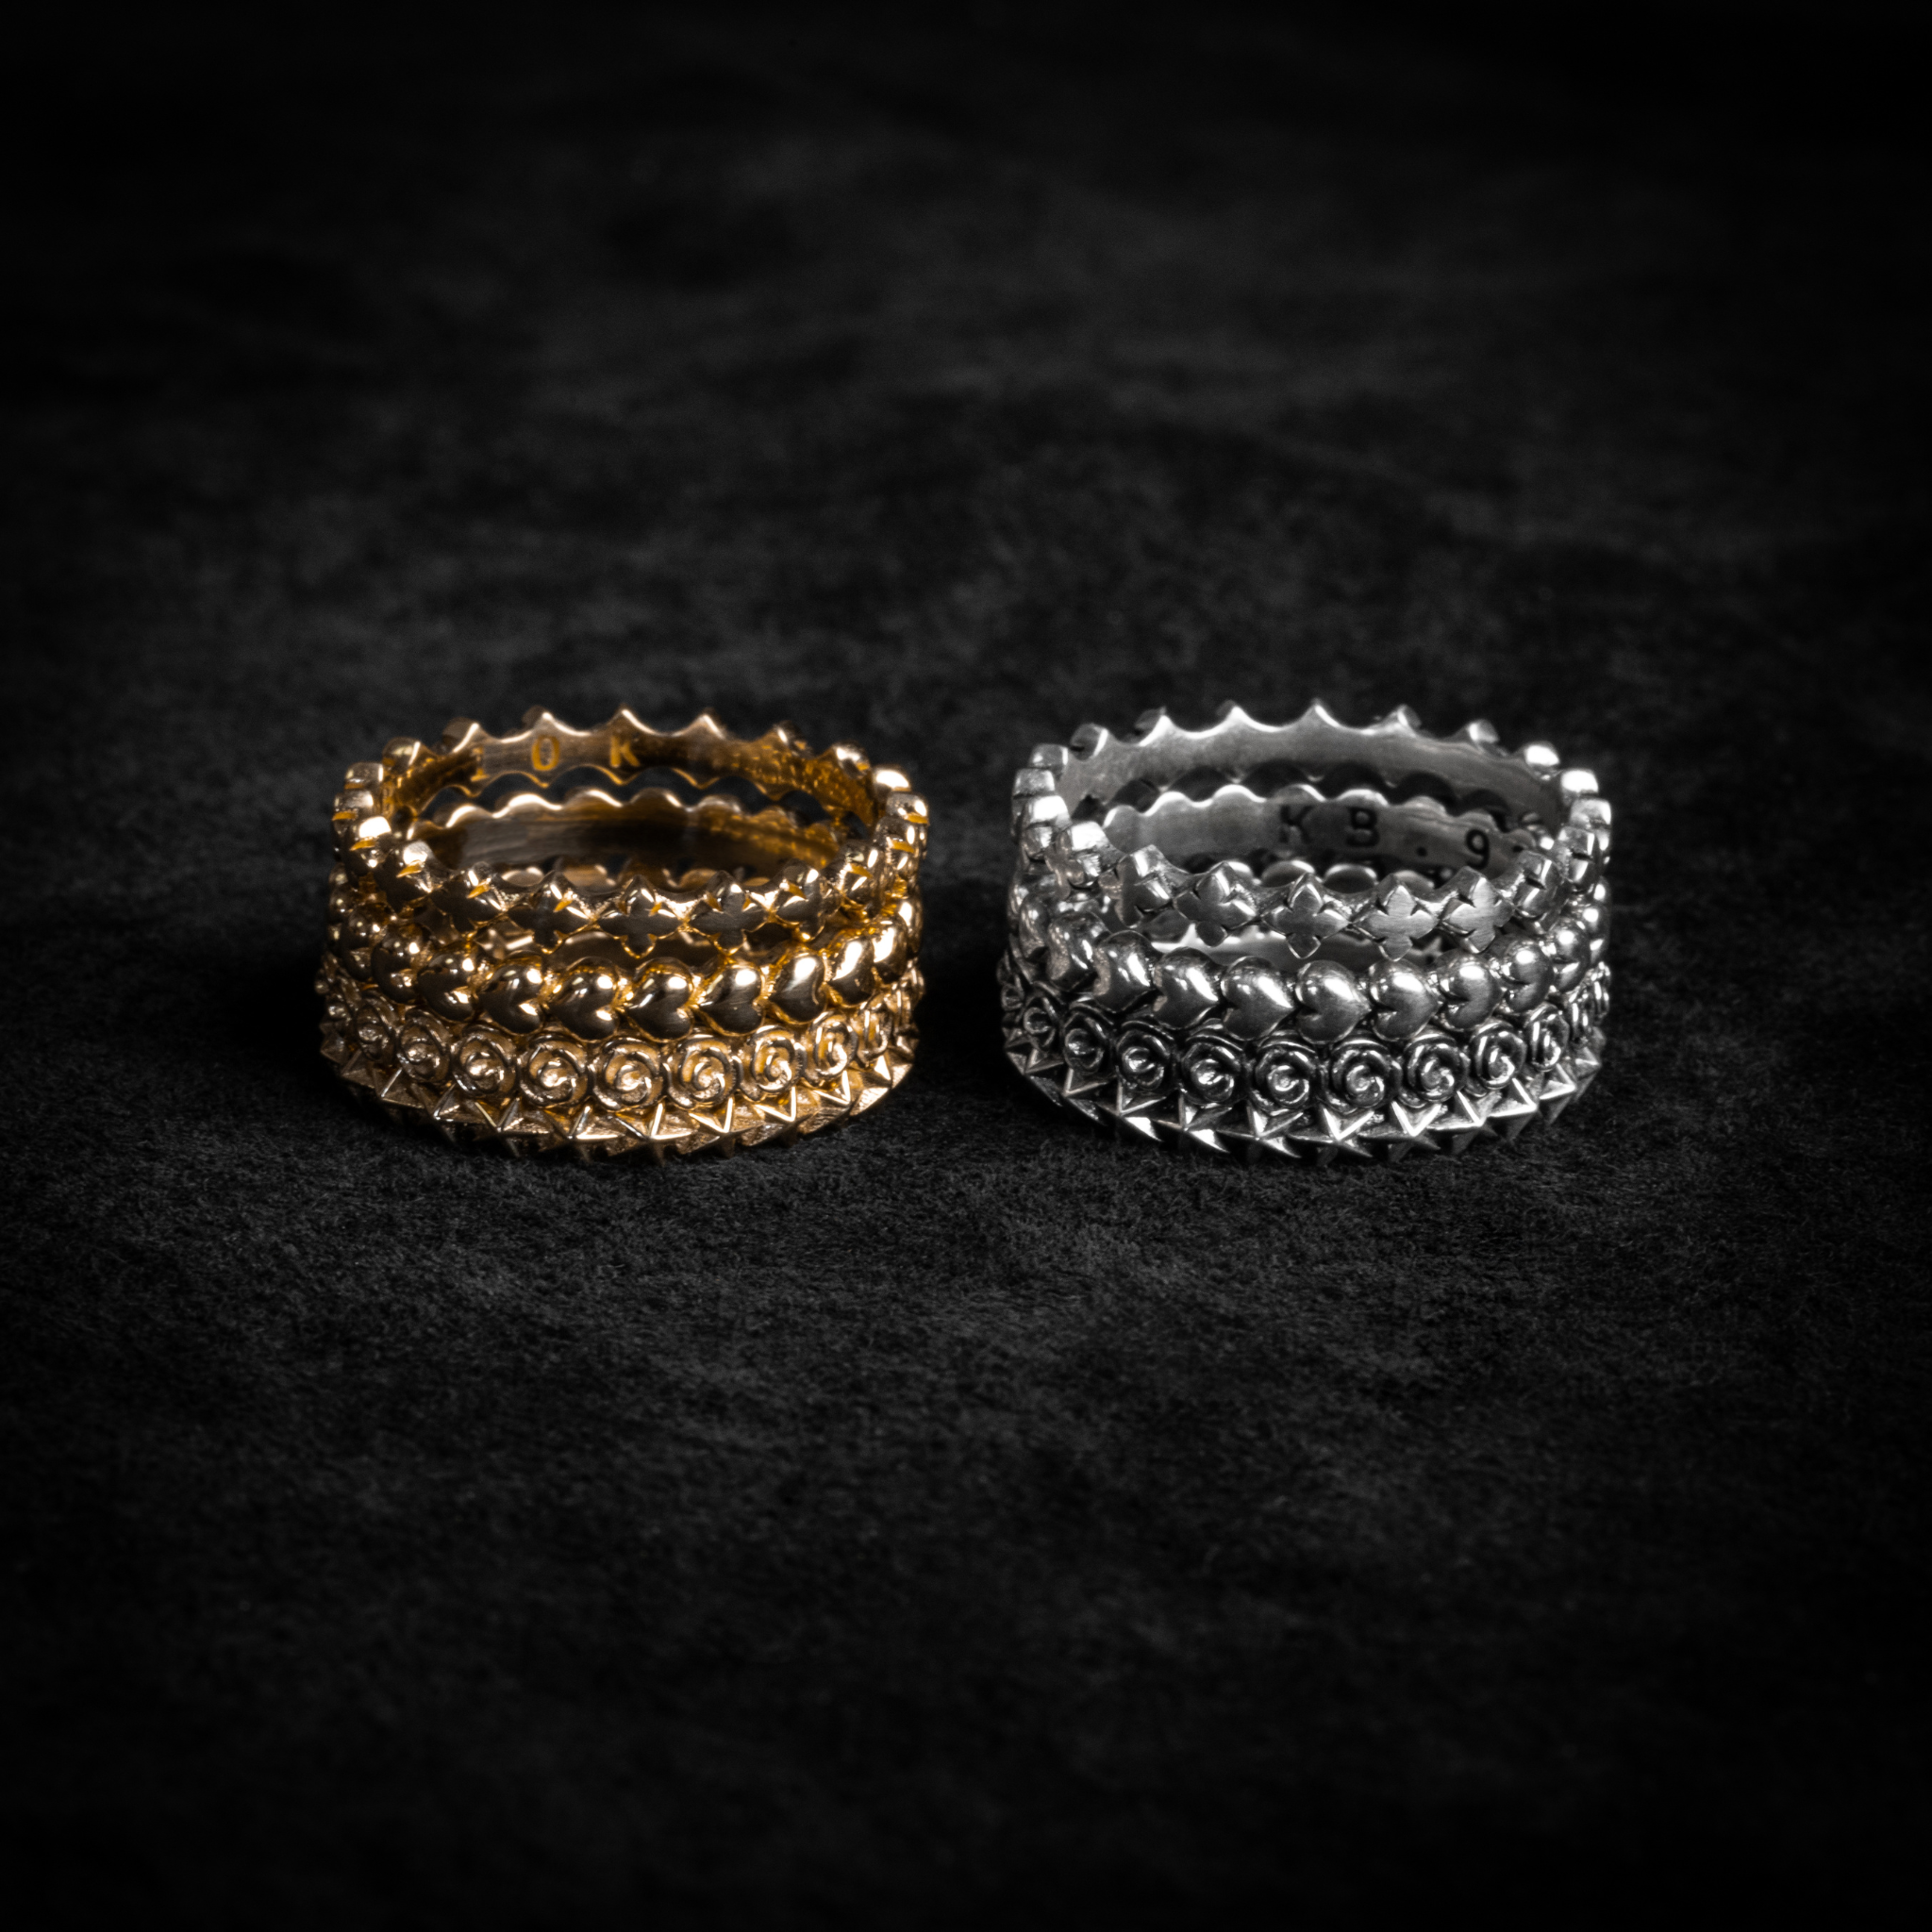 Micro Gold and Silver Stackable Rings Tower Stacked side by side